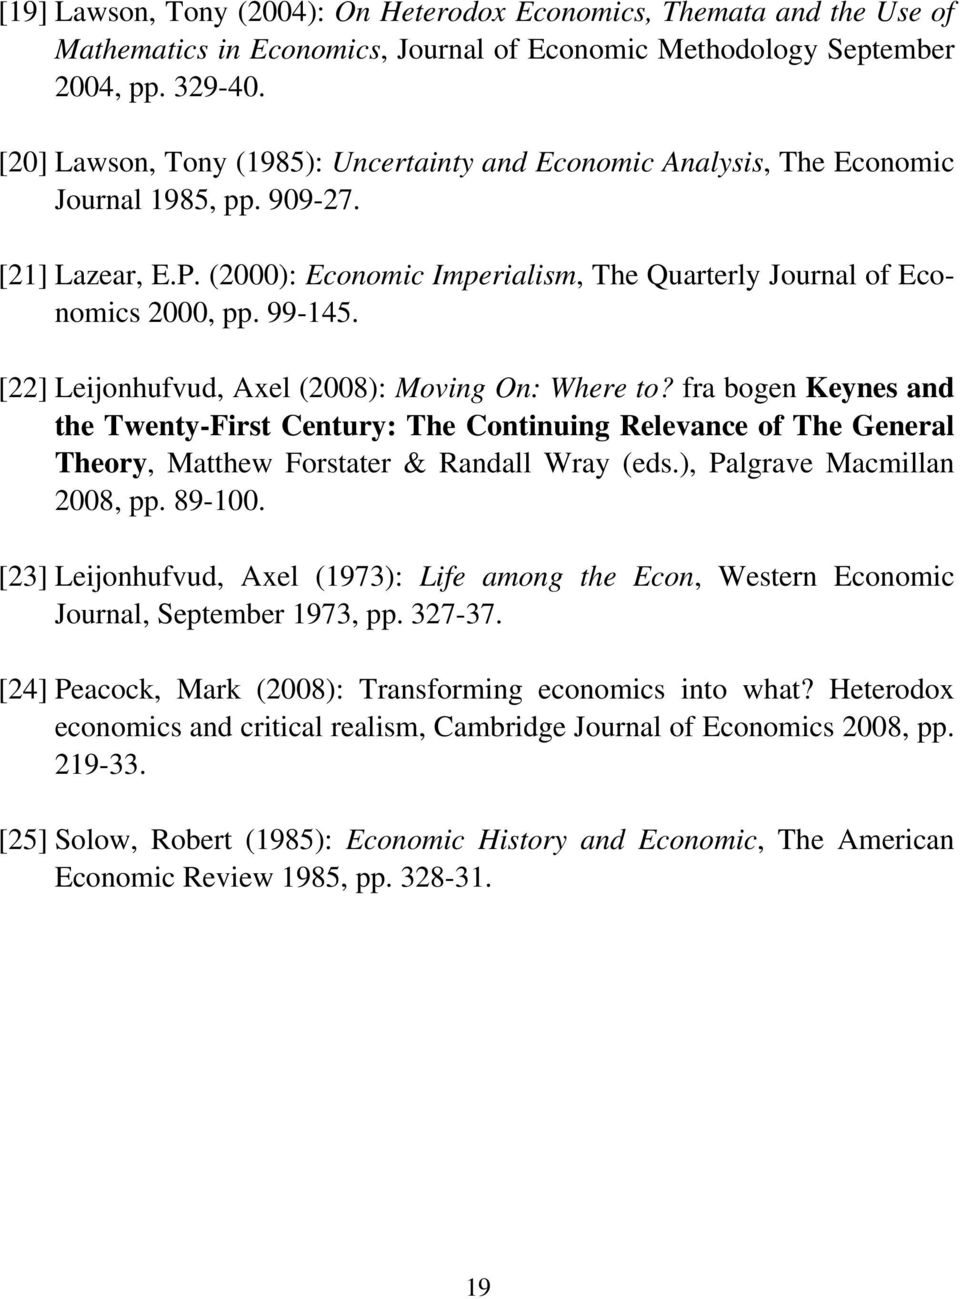 [22] Leijonhufvud, Axel (2008): Moving On: Where to? fra bogen Keynes and the Twenty-First Century: The Continuing Relevance of The General Theory, Matthew Forstater & Randall Wray (eds.